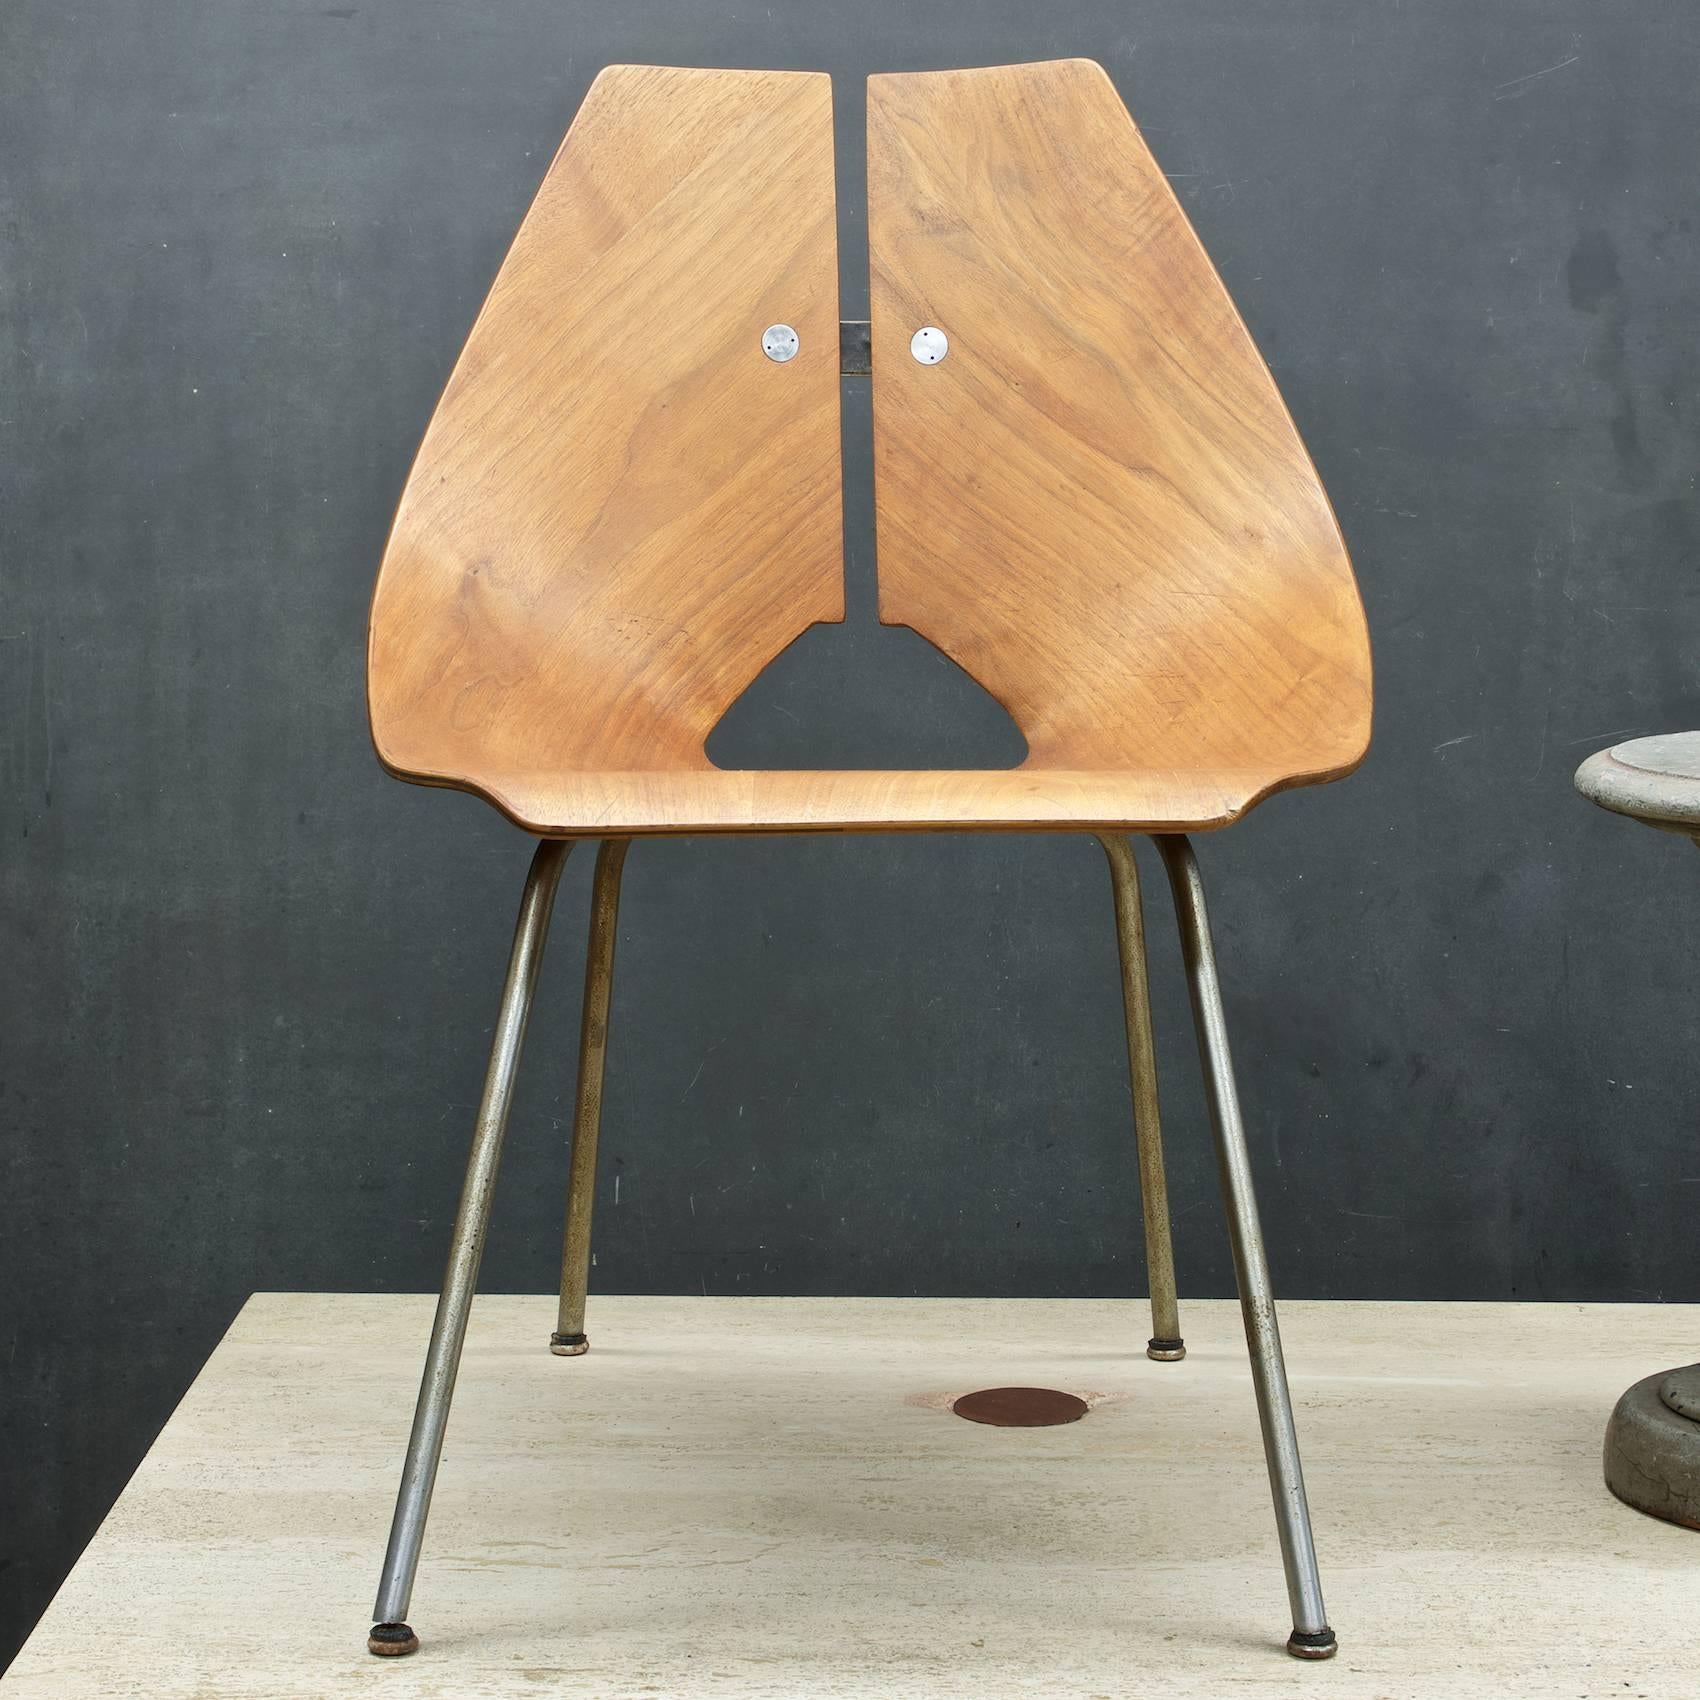 Rare 1949 model #939 bent plywood masterpiece of design mfg. by JG Furniture Company Inc. of Brooklyn, New York.

Ray Komai's molded plywood chair was manufactured in Brooklyn in 1949, using the latest American technology. Although European